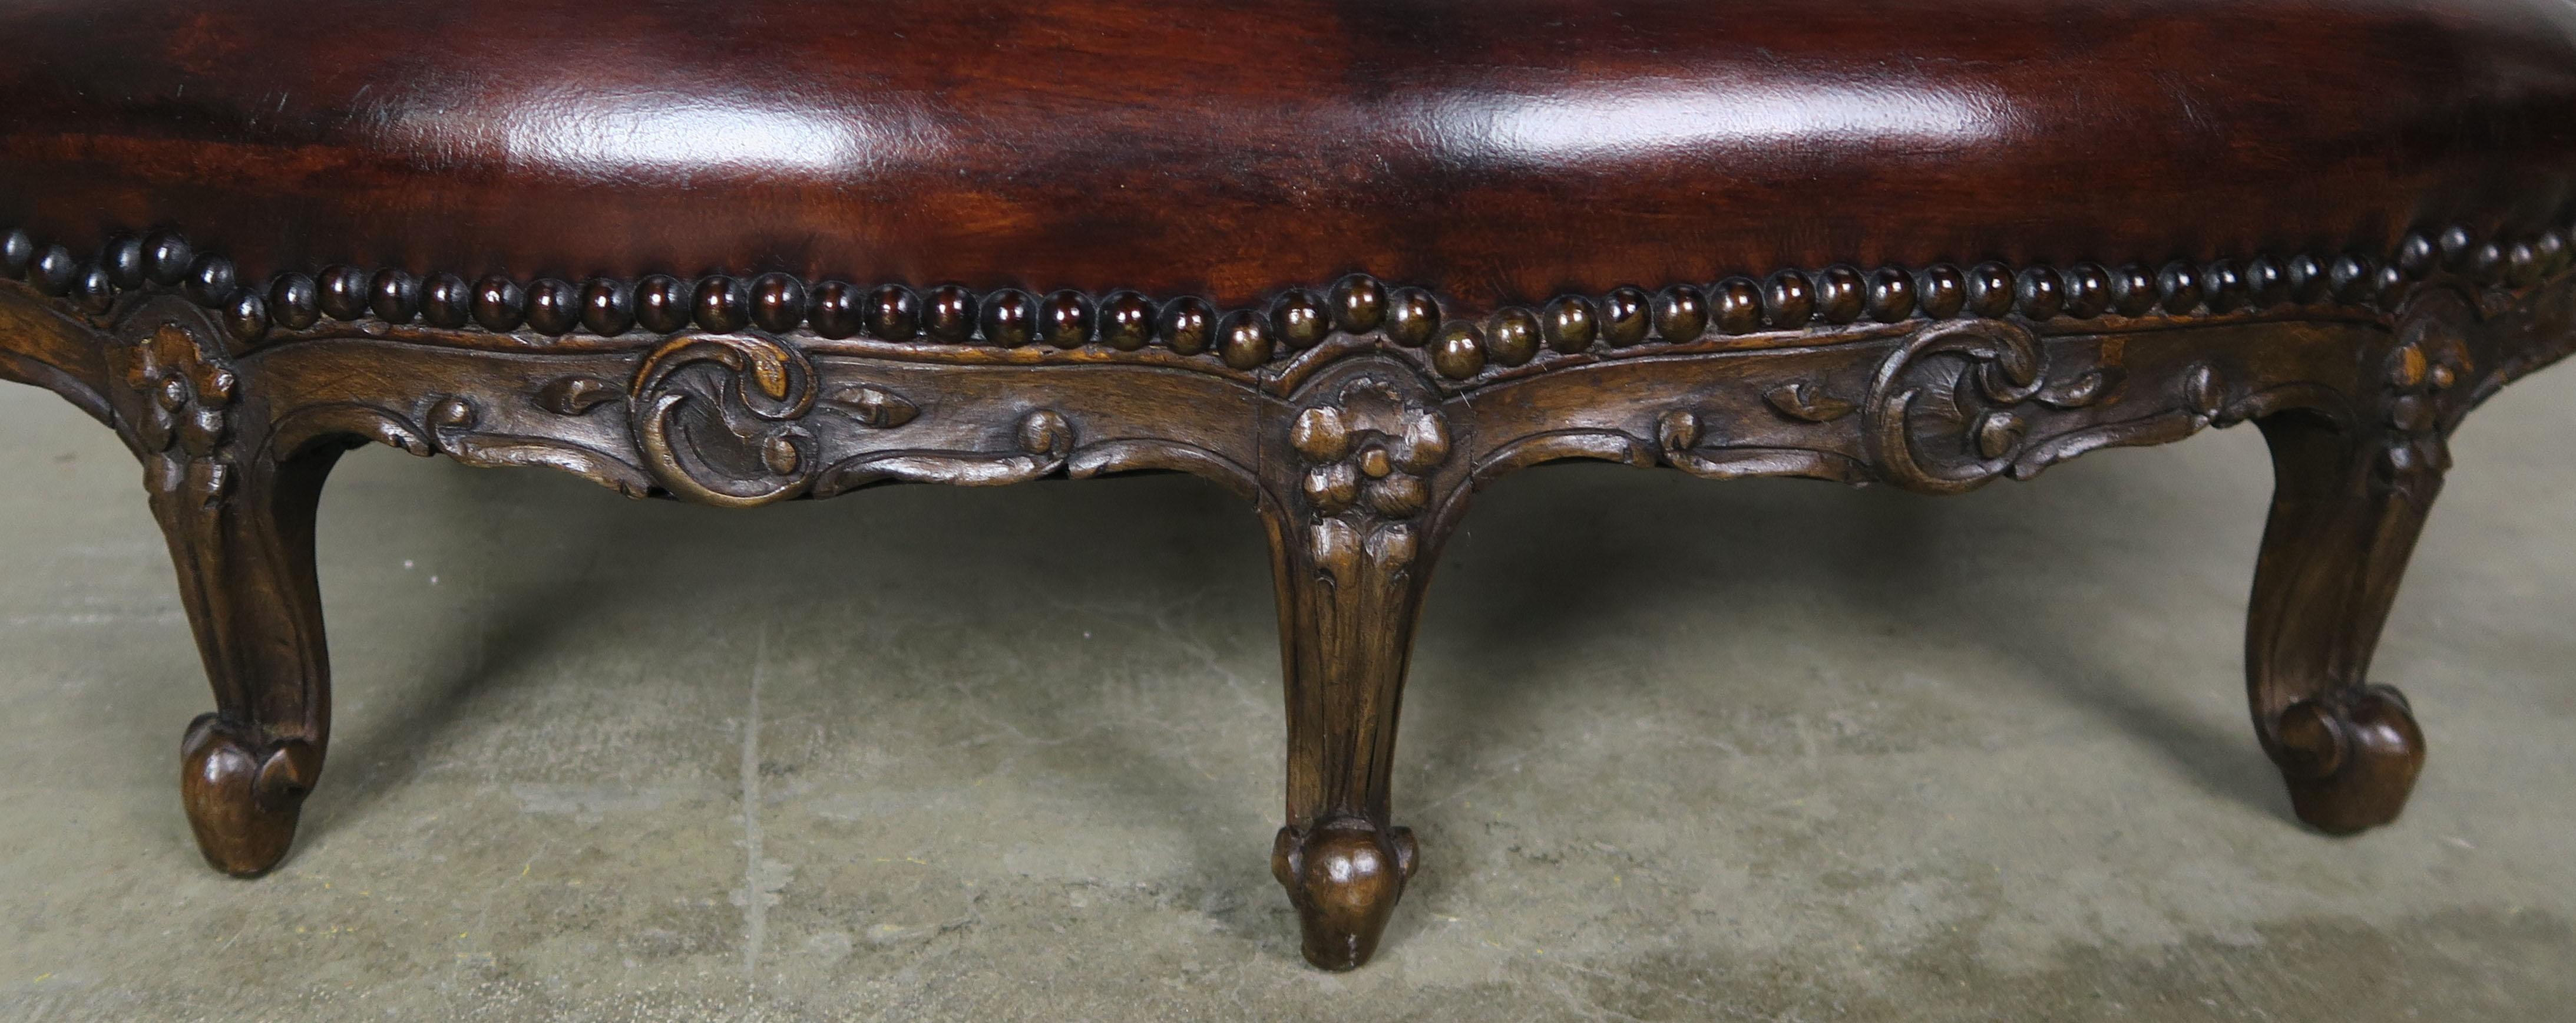 19th century French Walnut Leather Louis XV Style Footstool 3